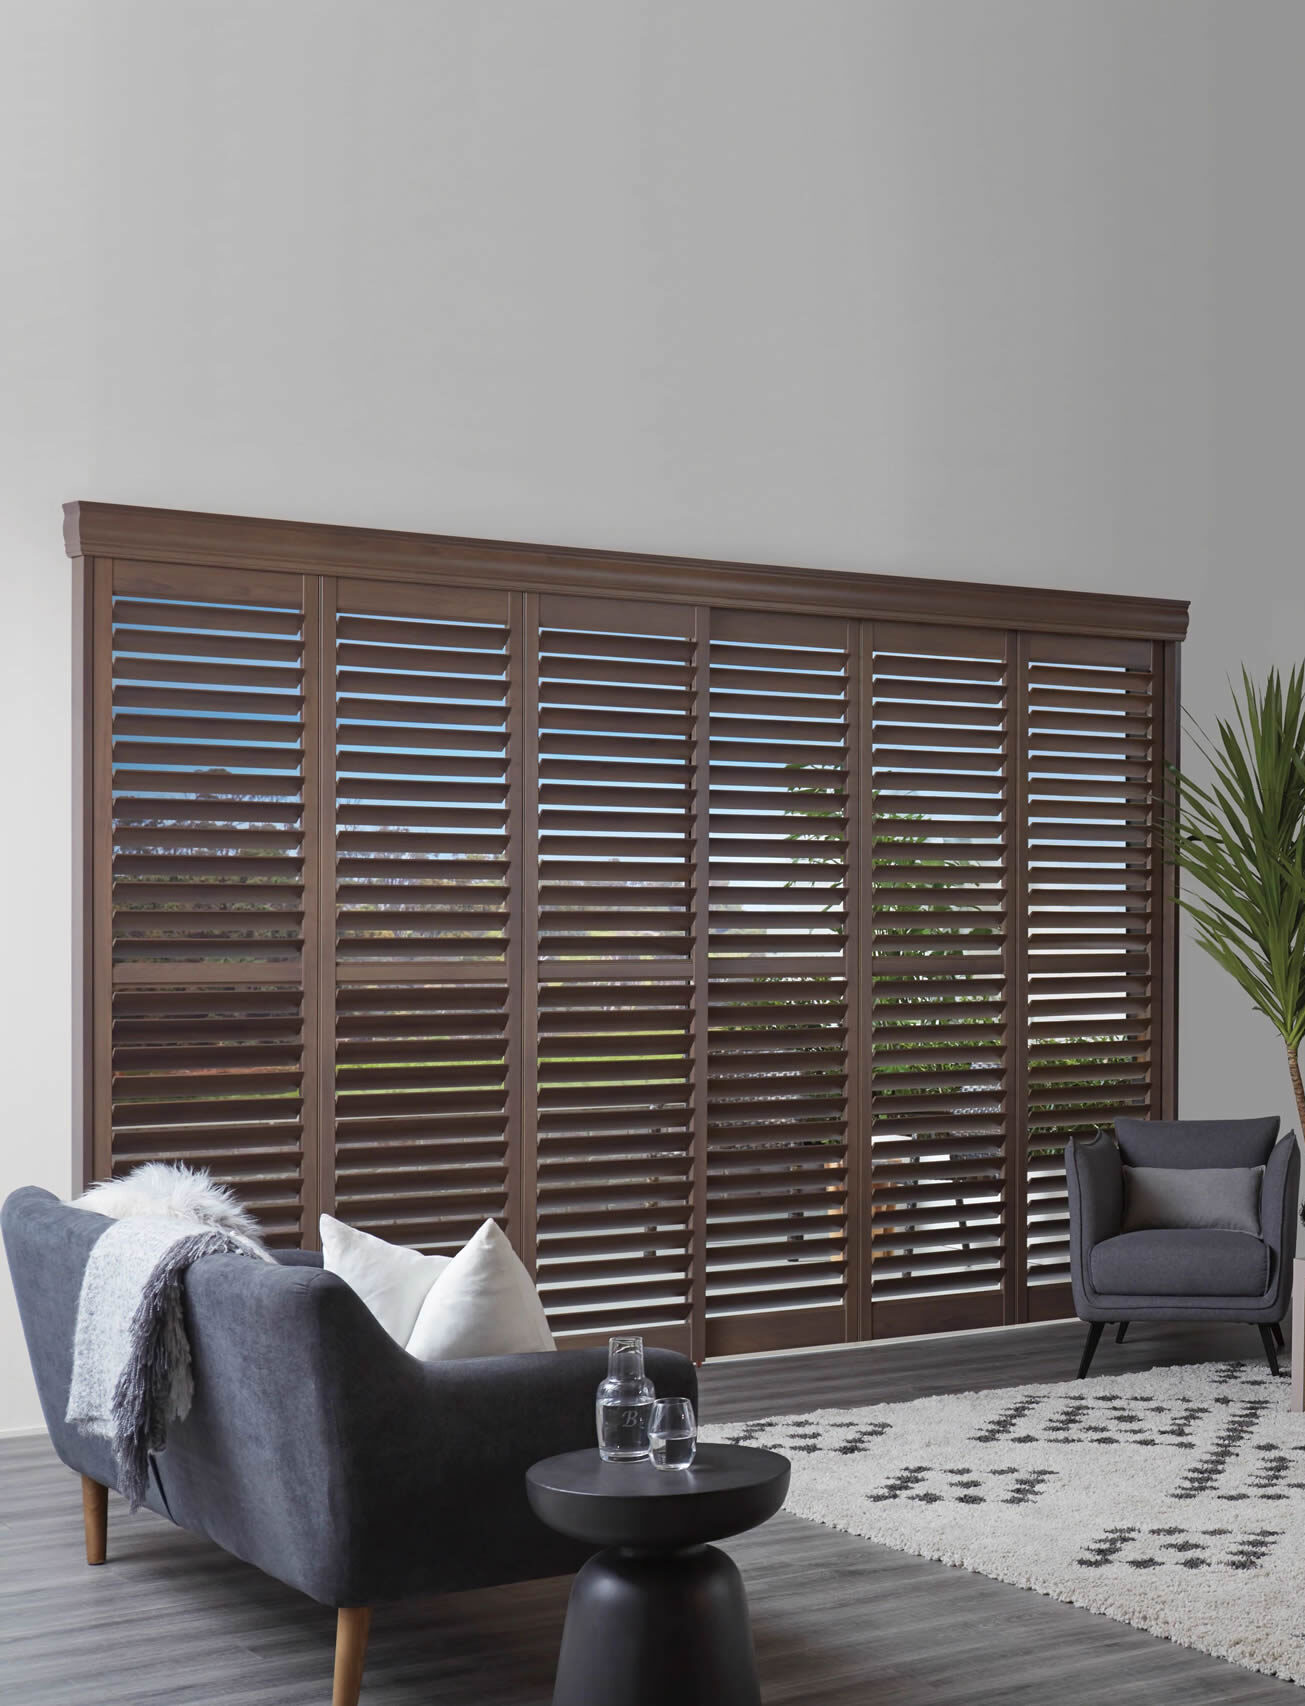 Window covered with brown Hunter Douglas shutters, and a chair in the foreground.